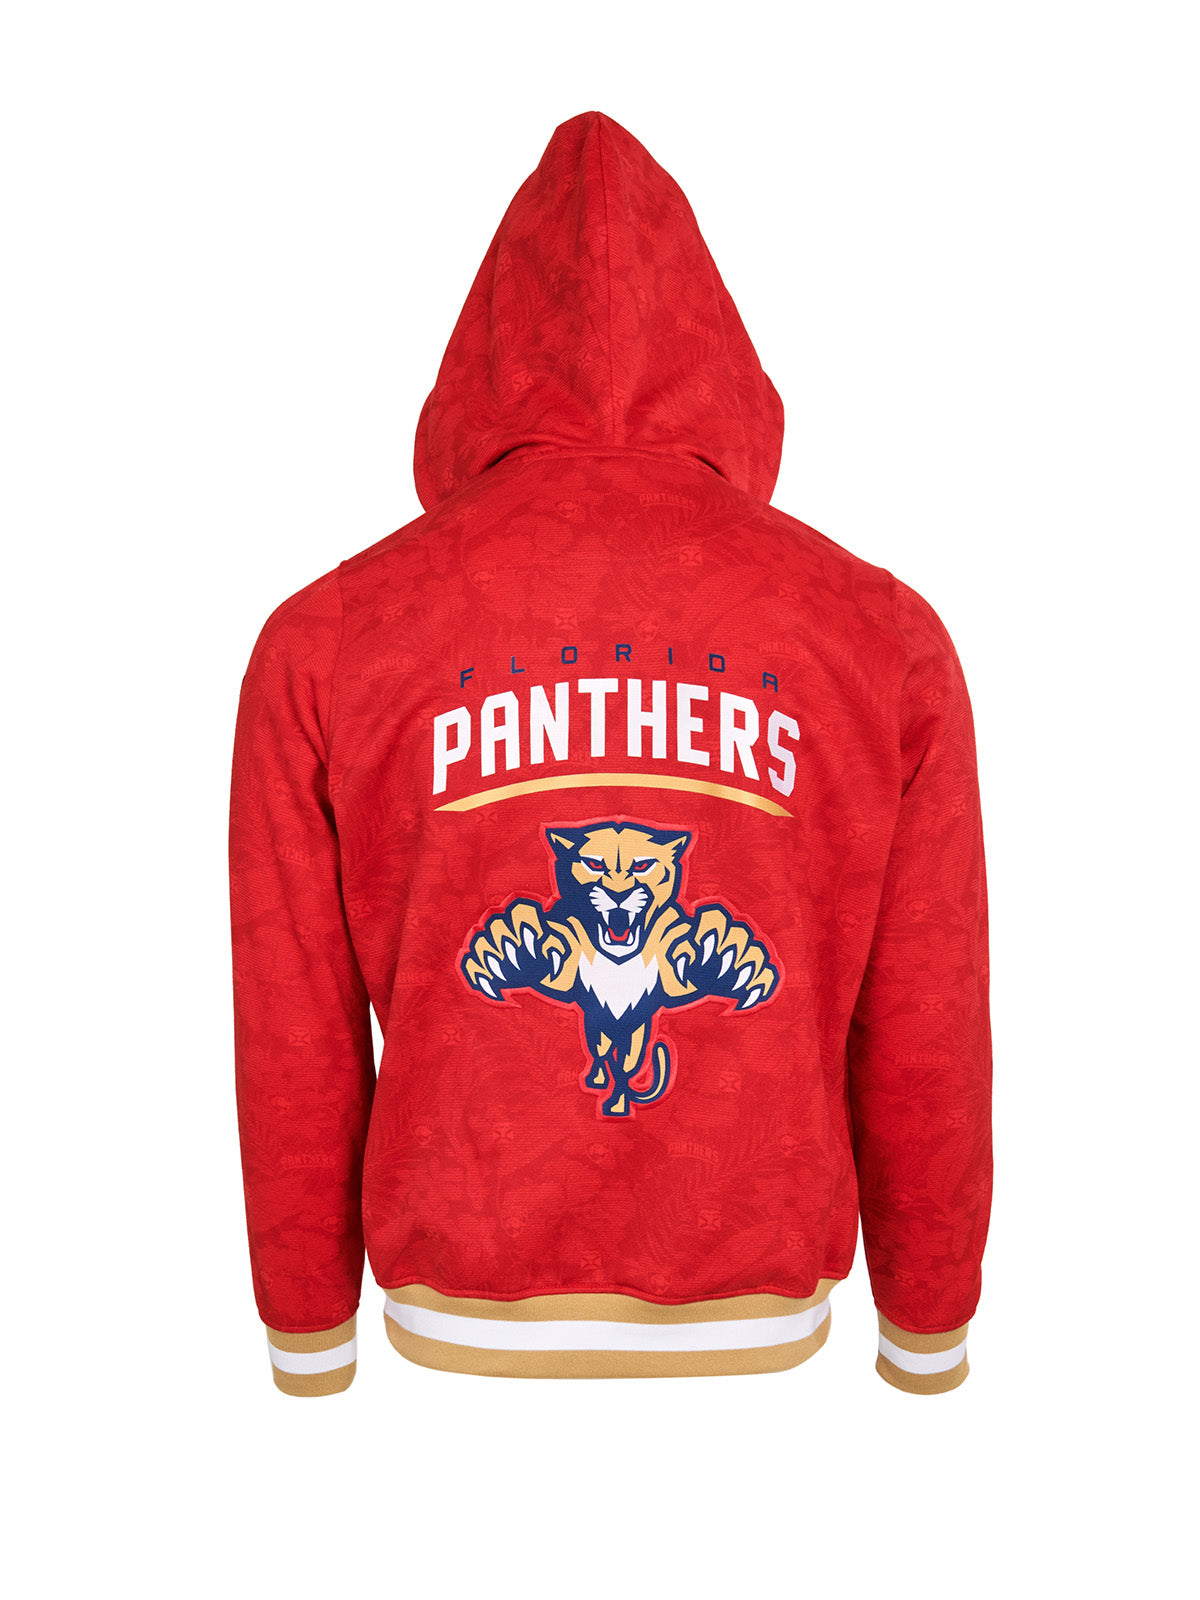 Florida Panthers Hoodie - Show your team spirit, with the iconic team logo patch centered on the back, and proudly display your Florida Panthers support in their team colors with this NHL hockey hoodie.